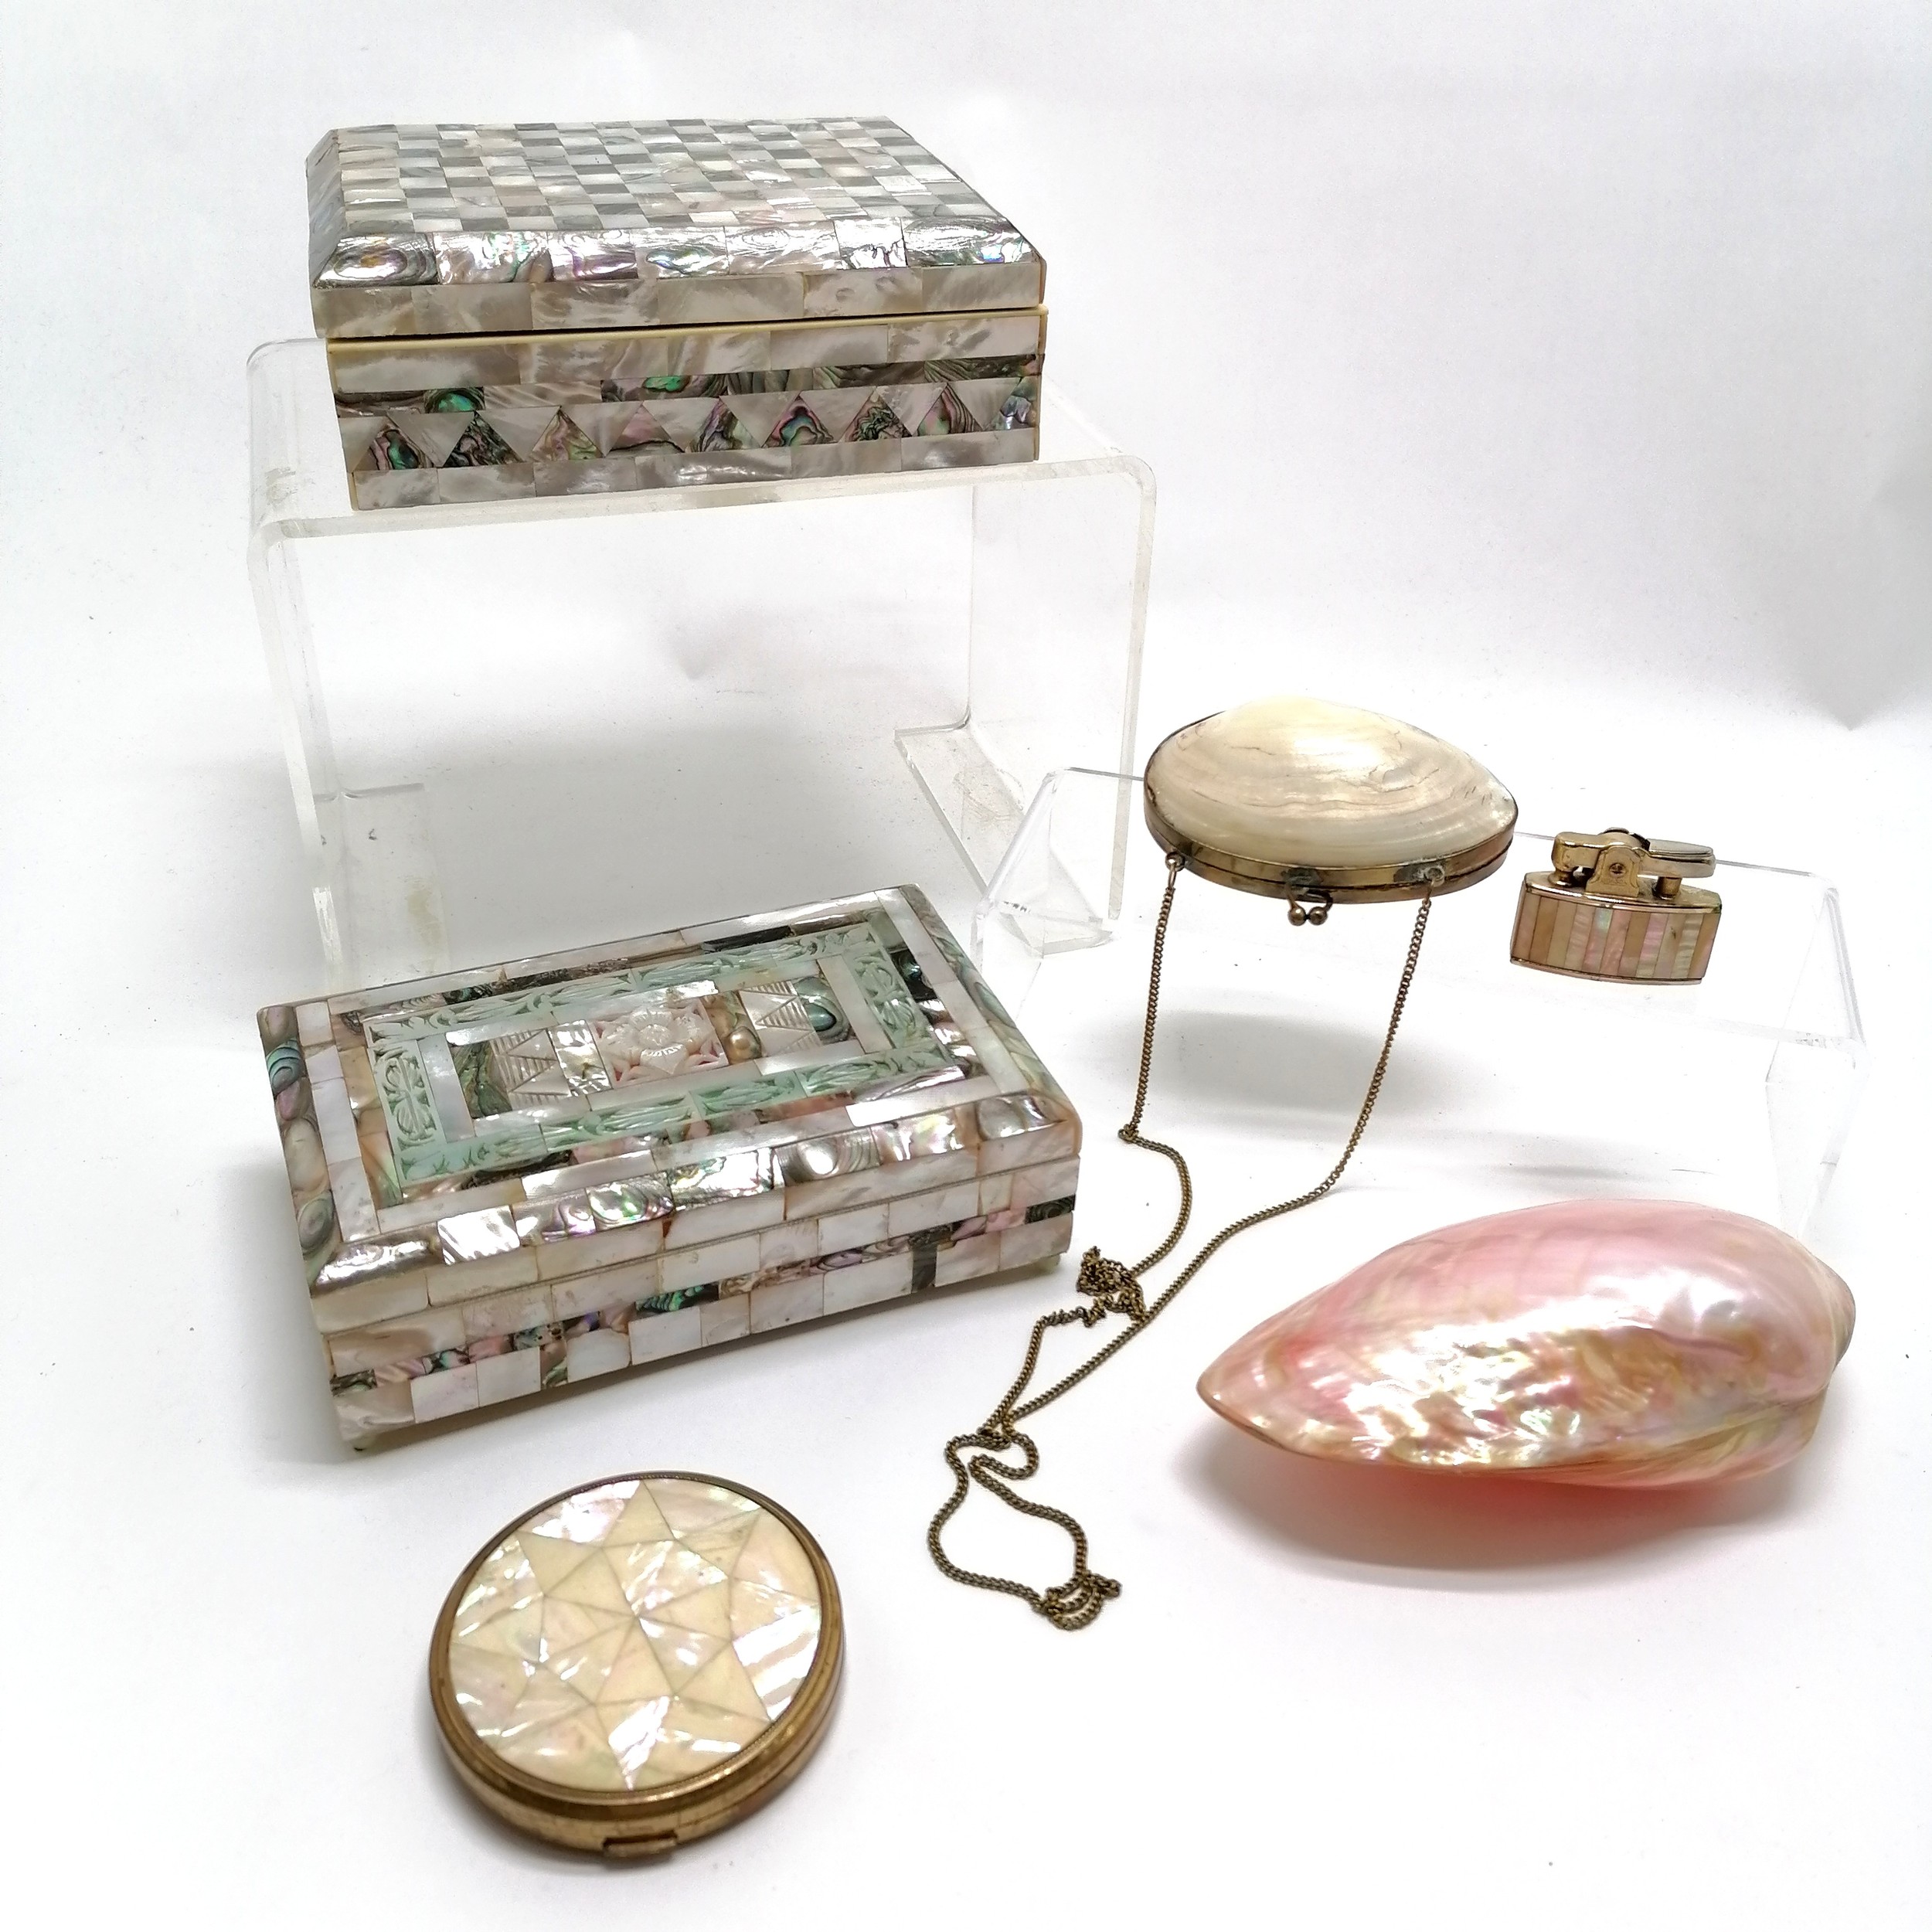 2 x mother of pearl / paua shell decorated boxes - largest 17cm x 13cm x 5.5cm and has some losses